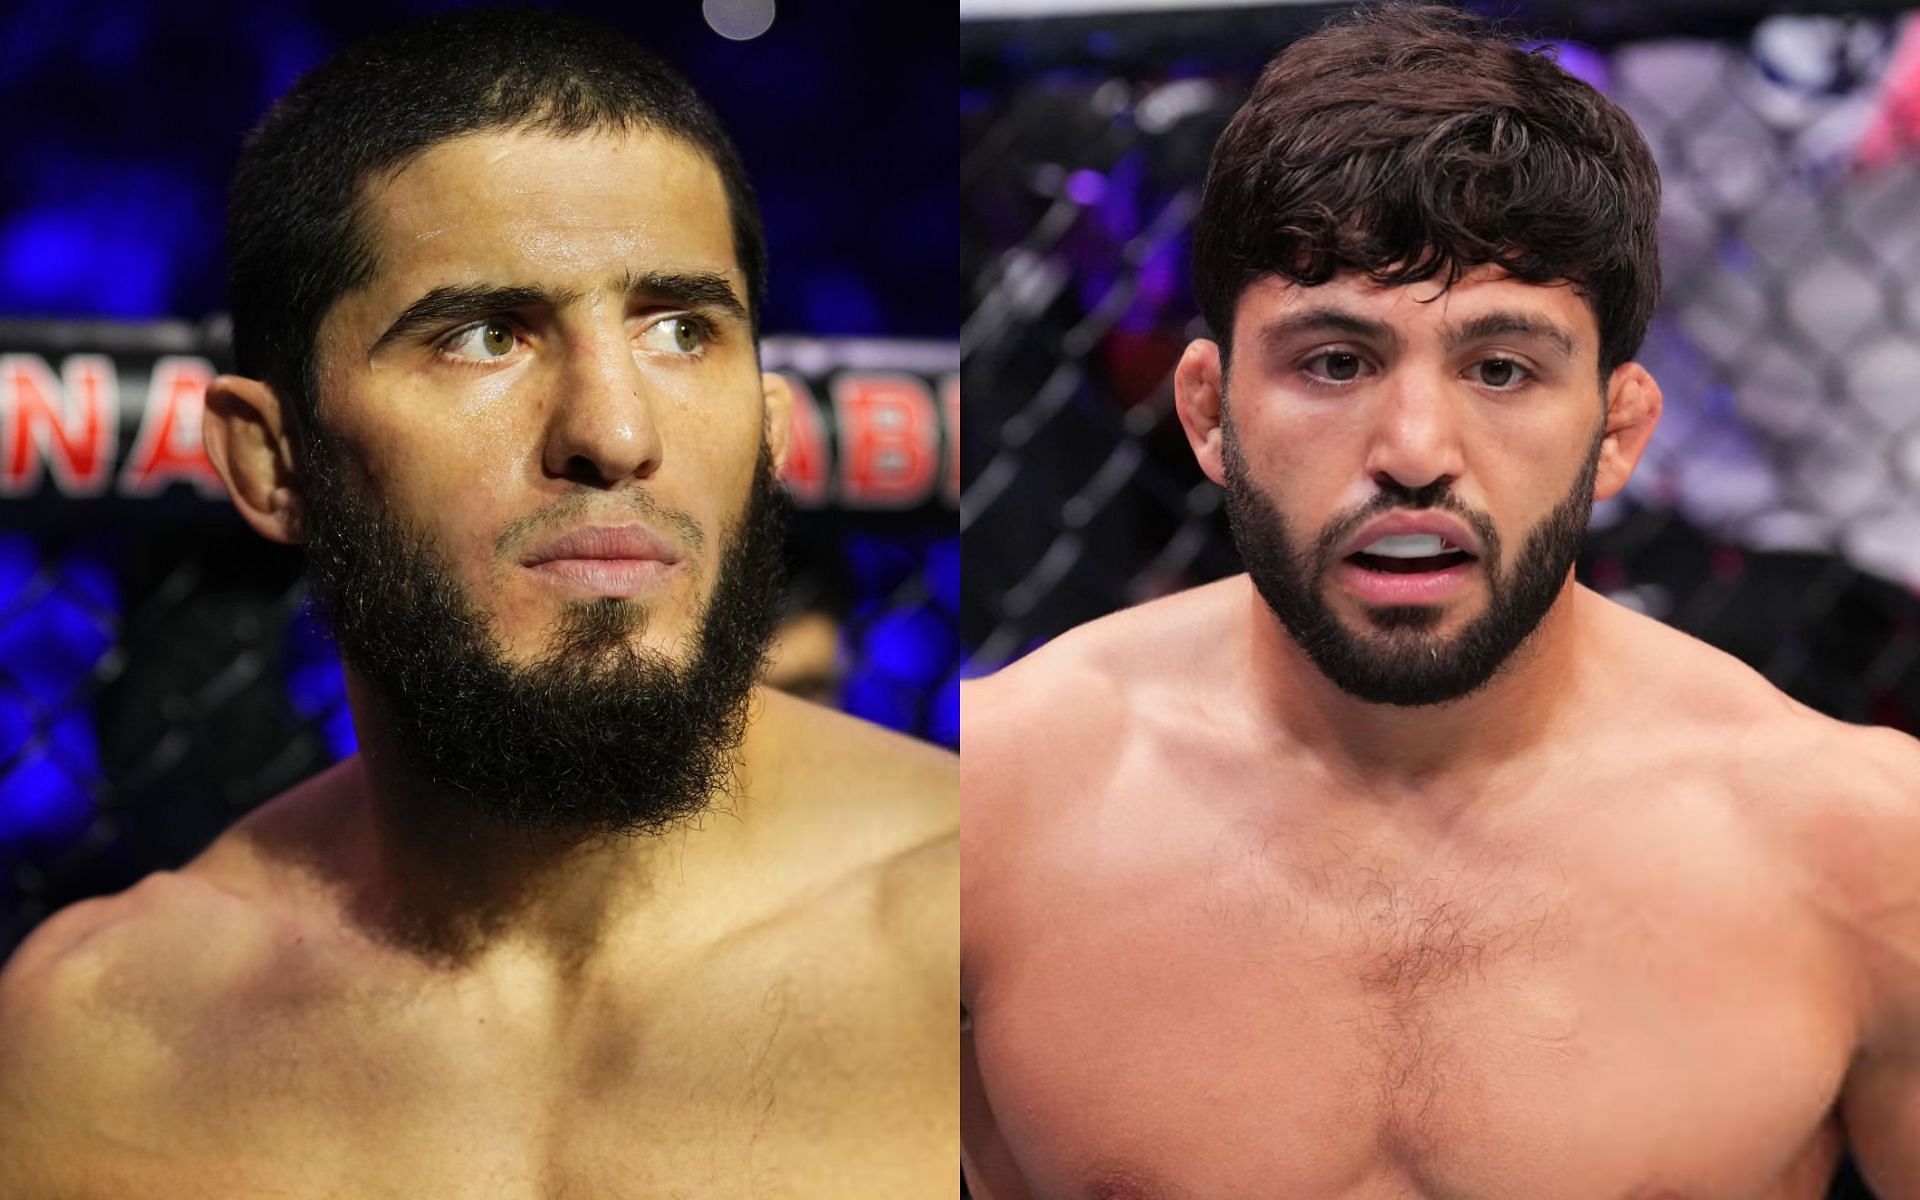 Islam Makhachev (left) and Arman Tsarukyan (right) [Images Courtesy: @GettyImages]